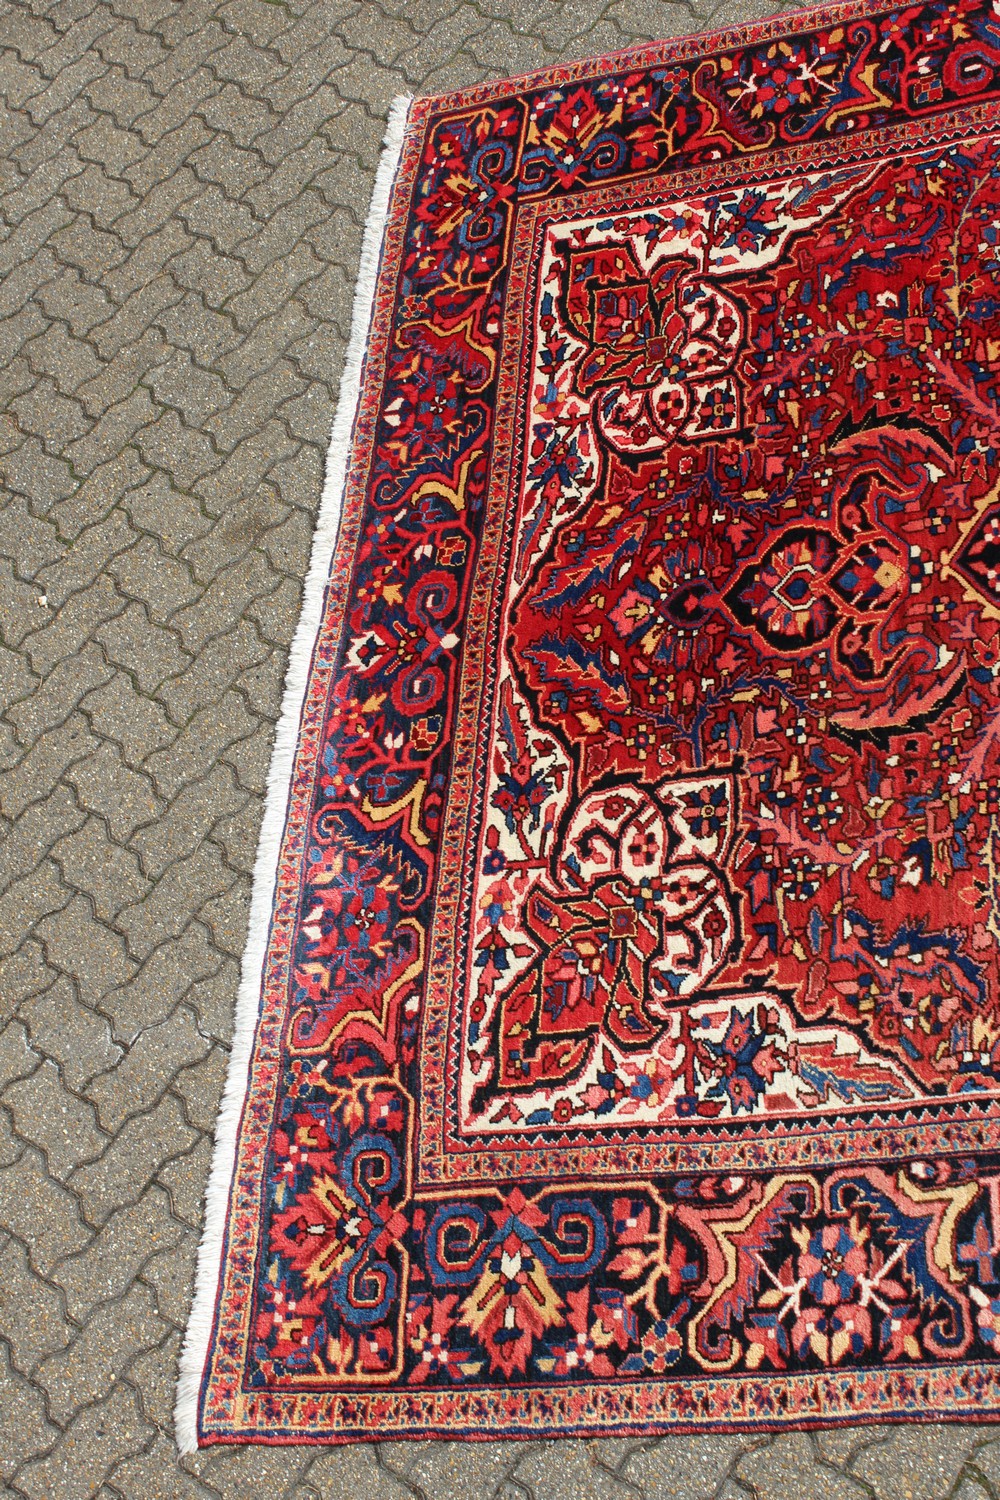 A PERSIAN STYLE HERIZ CARPET, 20TH CENTURY, red ground with allover stylised floral decoration (some - Image 5 of 9